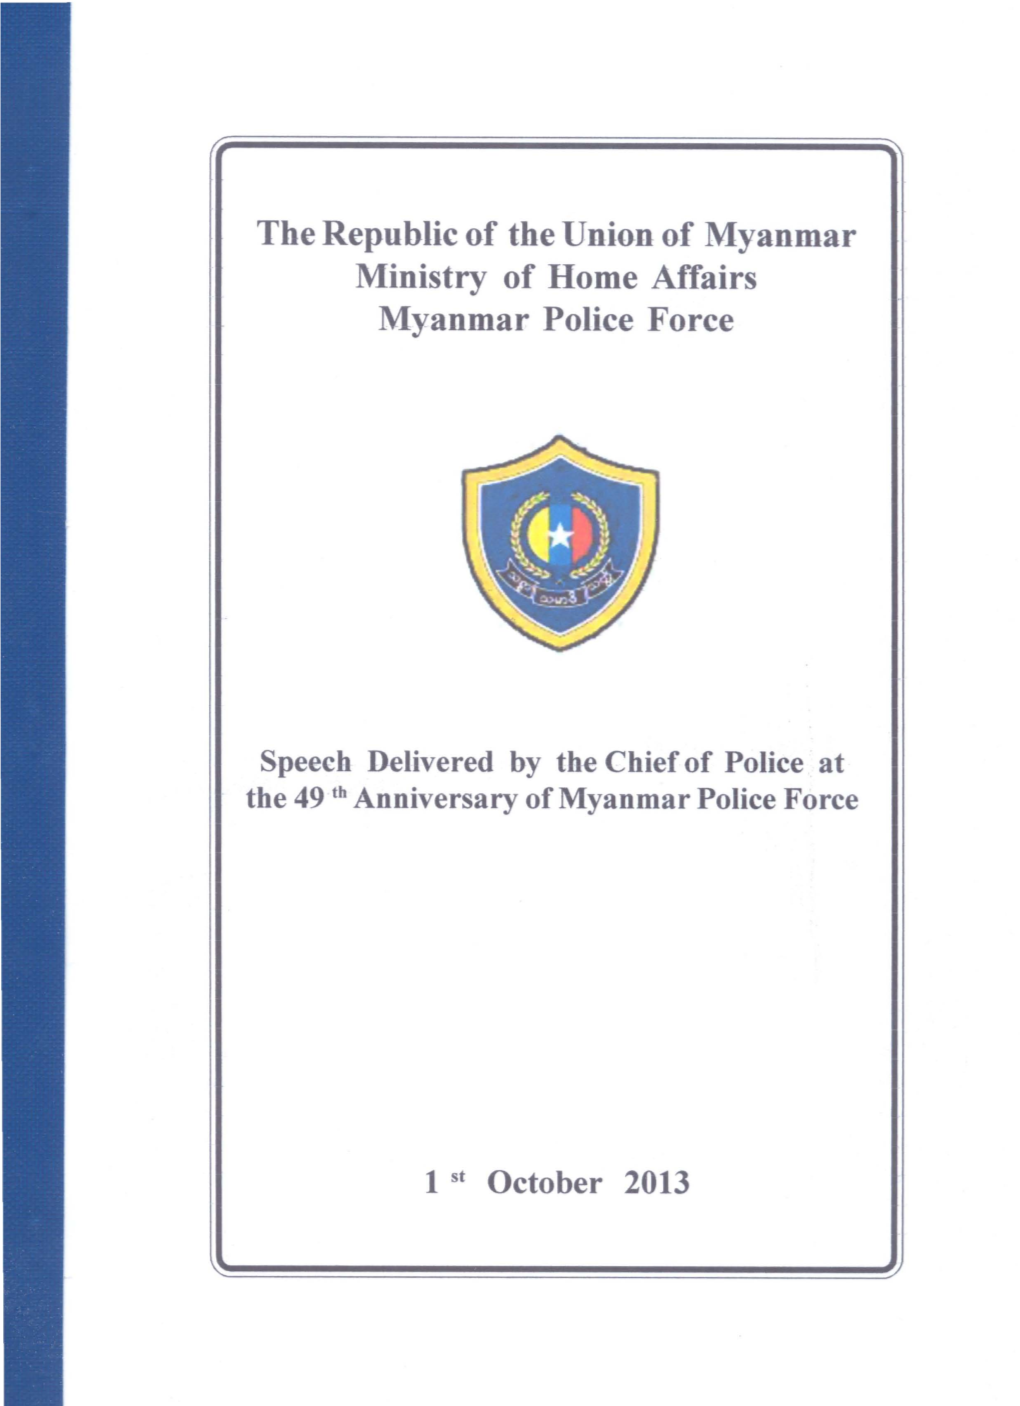 The Republic of the Union of Myanmar Ministry of Home Affairs Myanmar Police Force